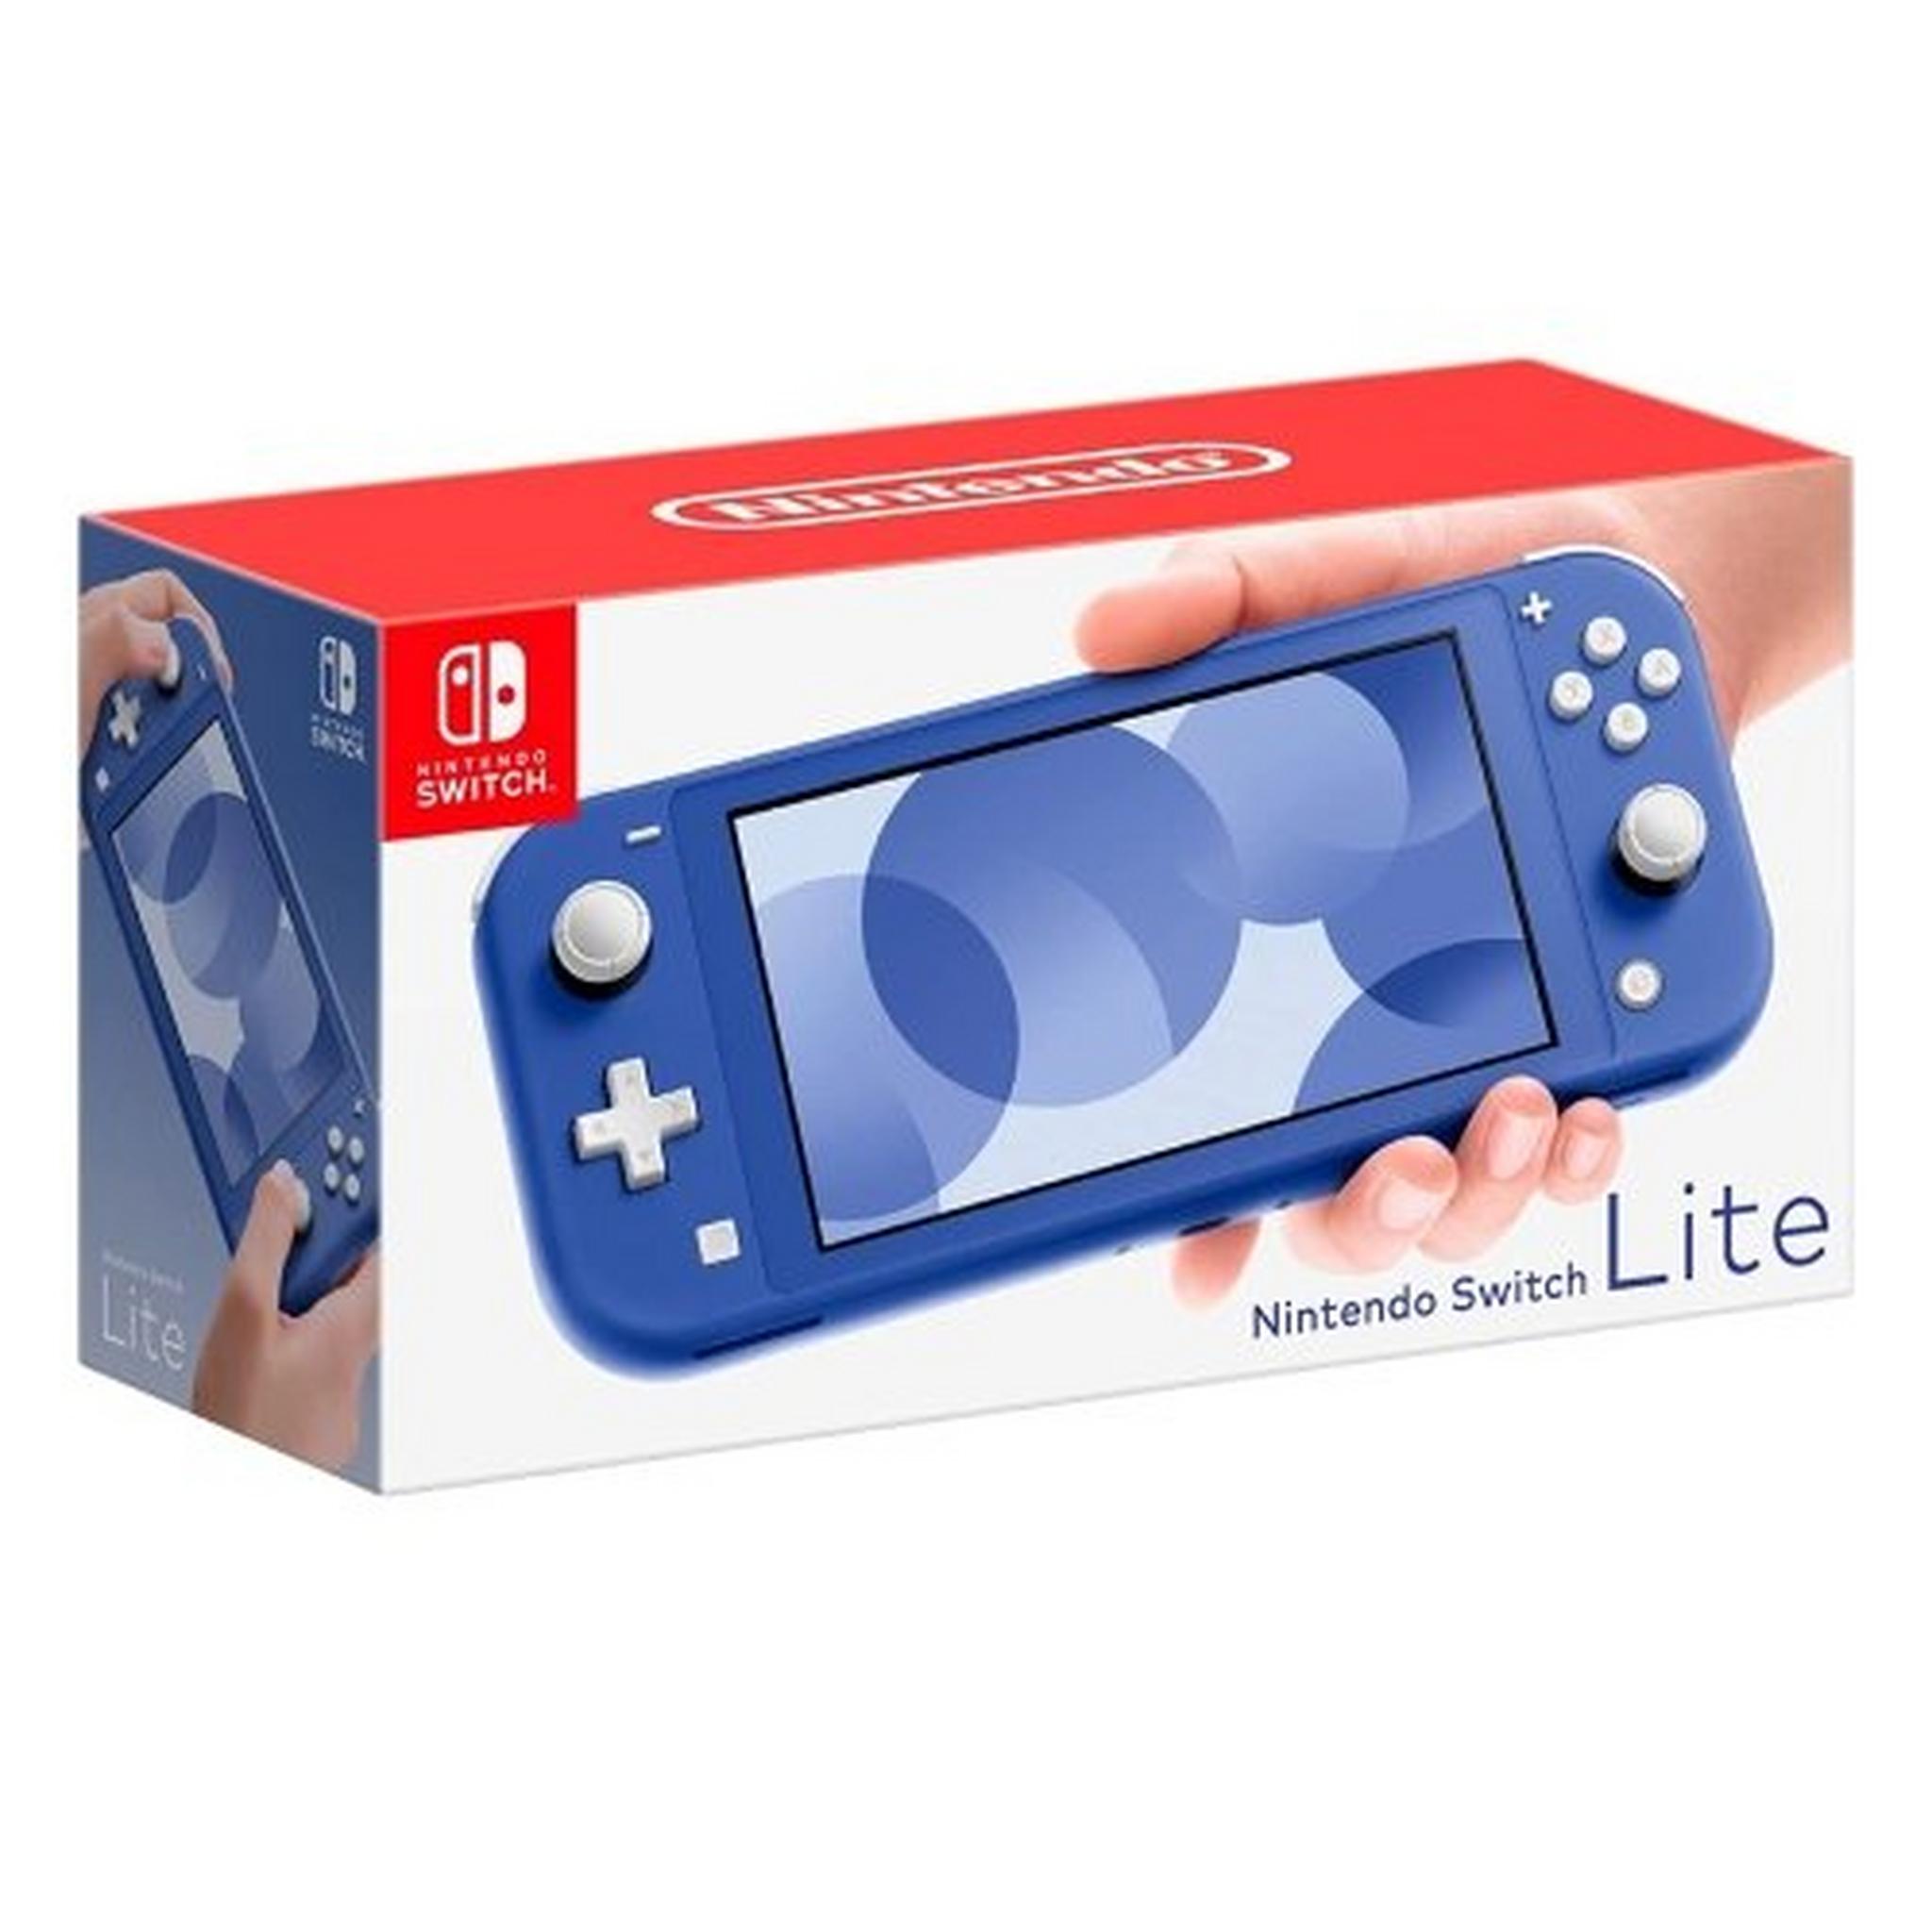 Nintendo Switch Lite Gaming Console - Blue